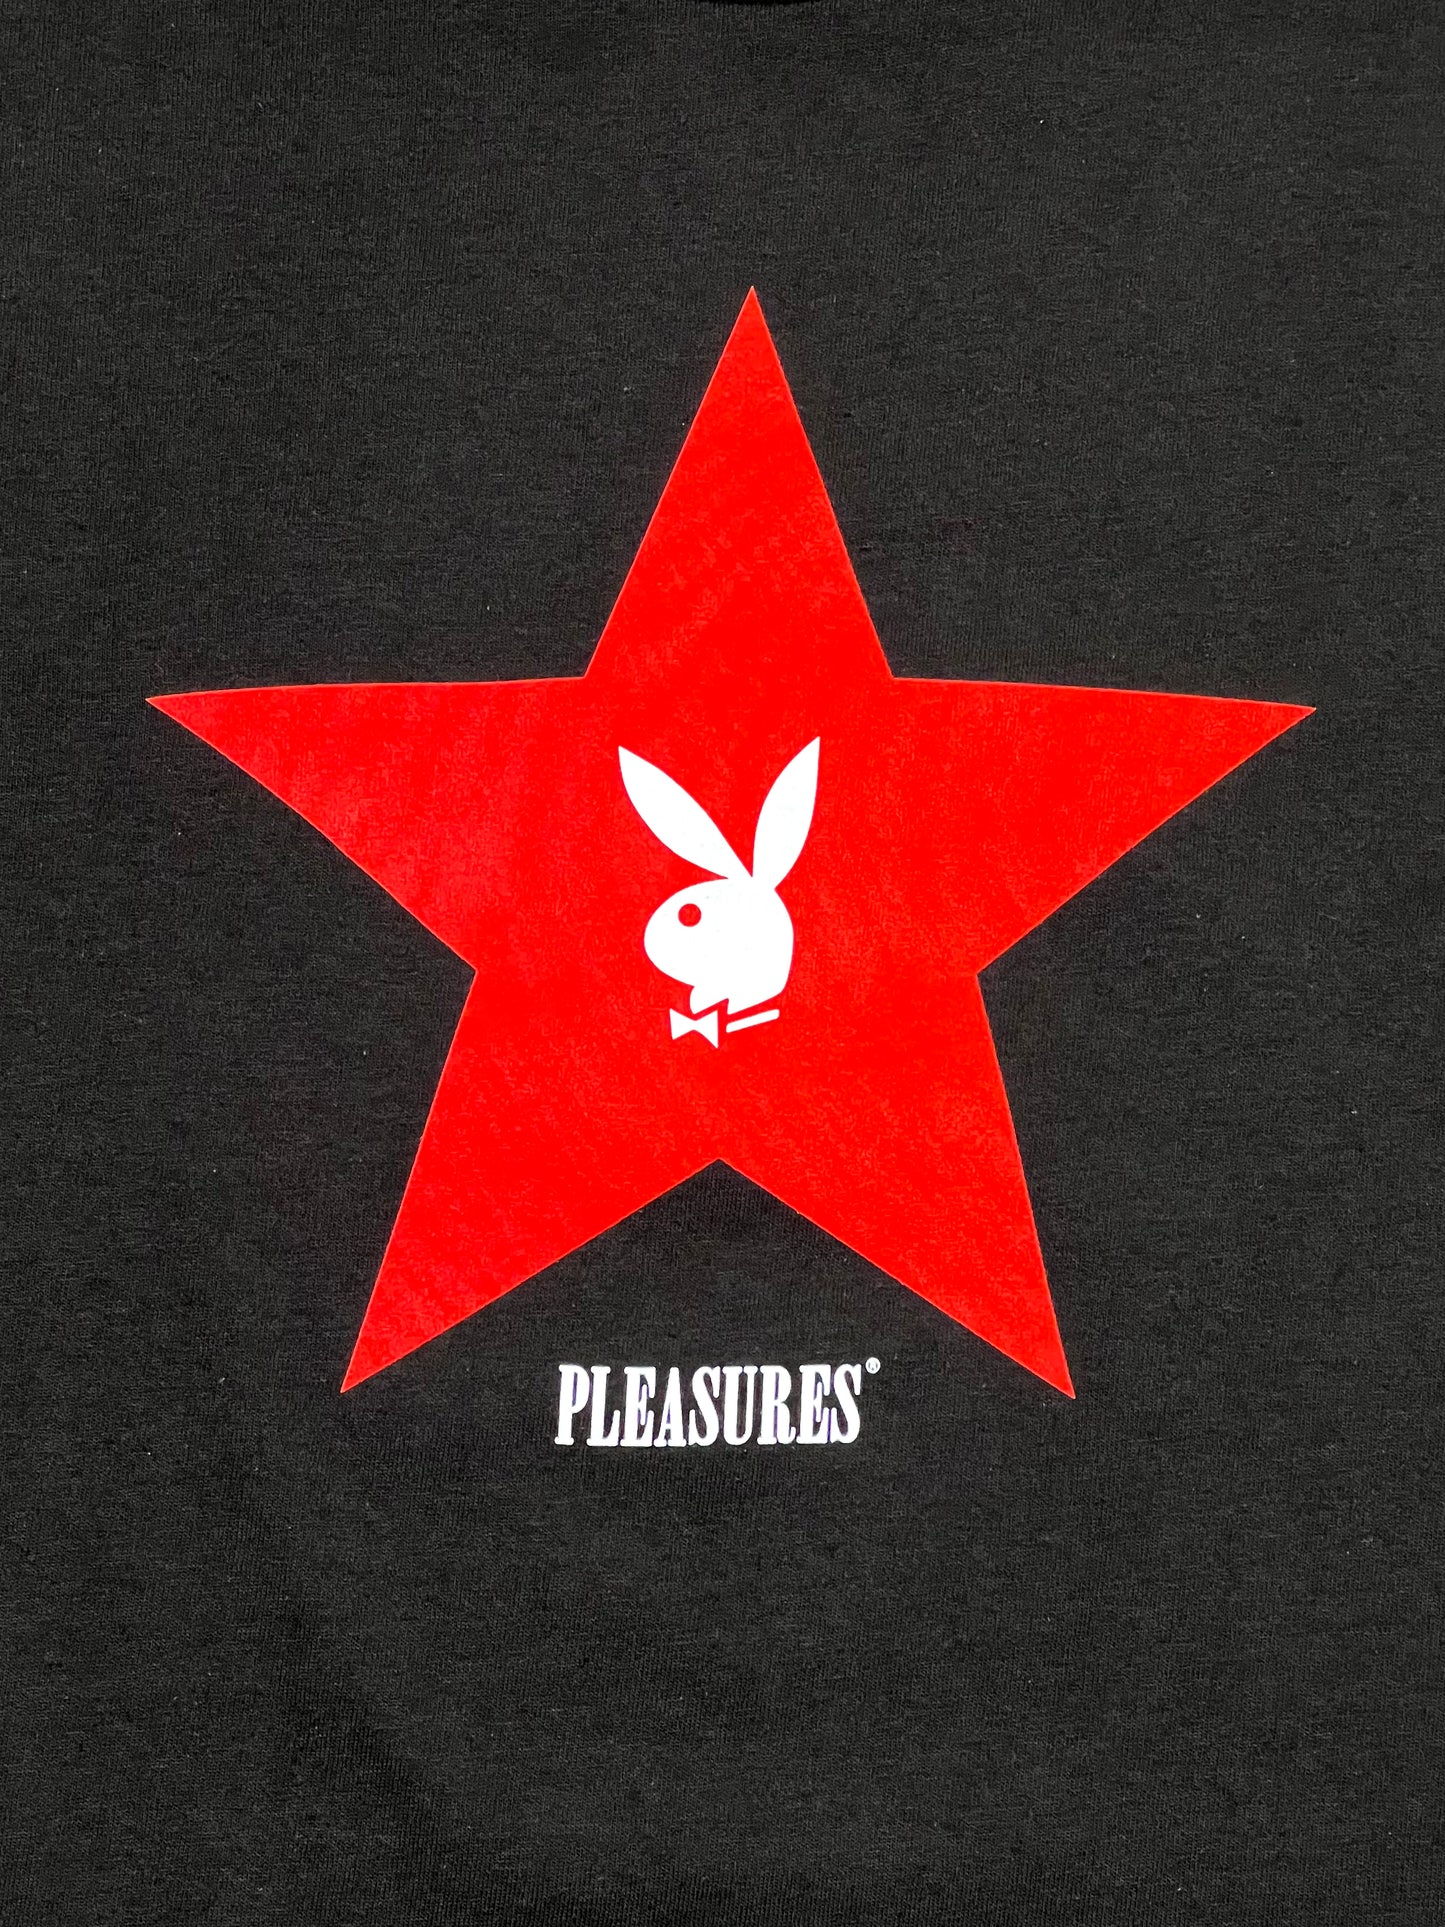 A PLEASURES black sweatshirt with a red star on it.